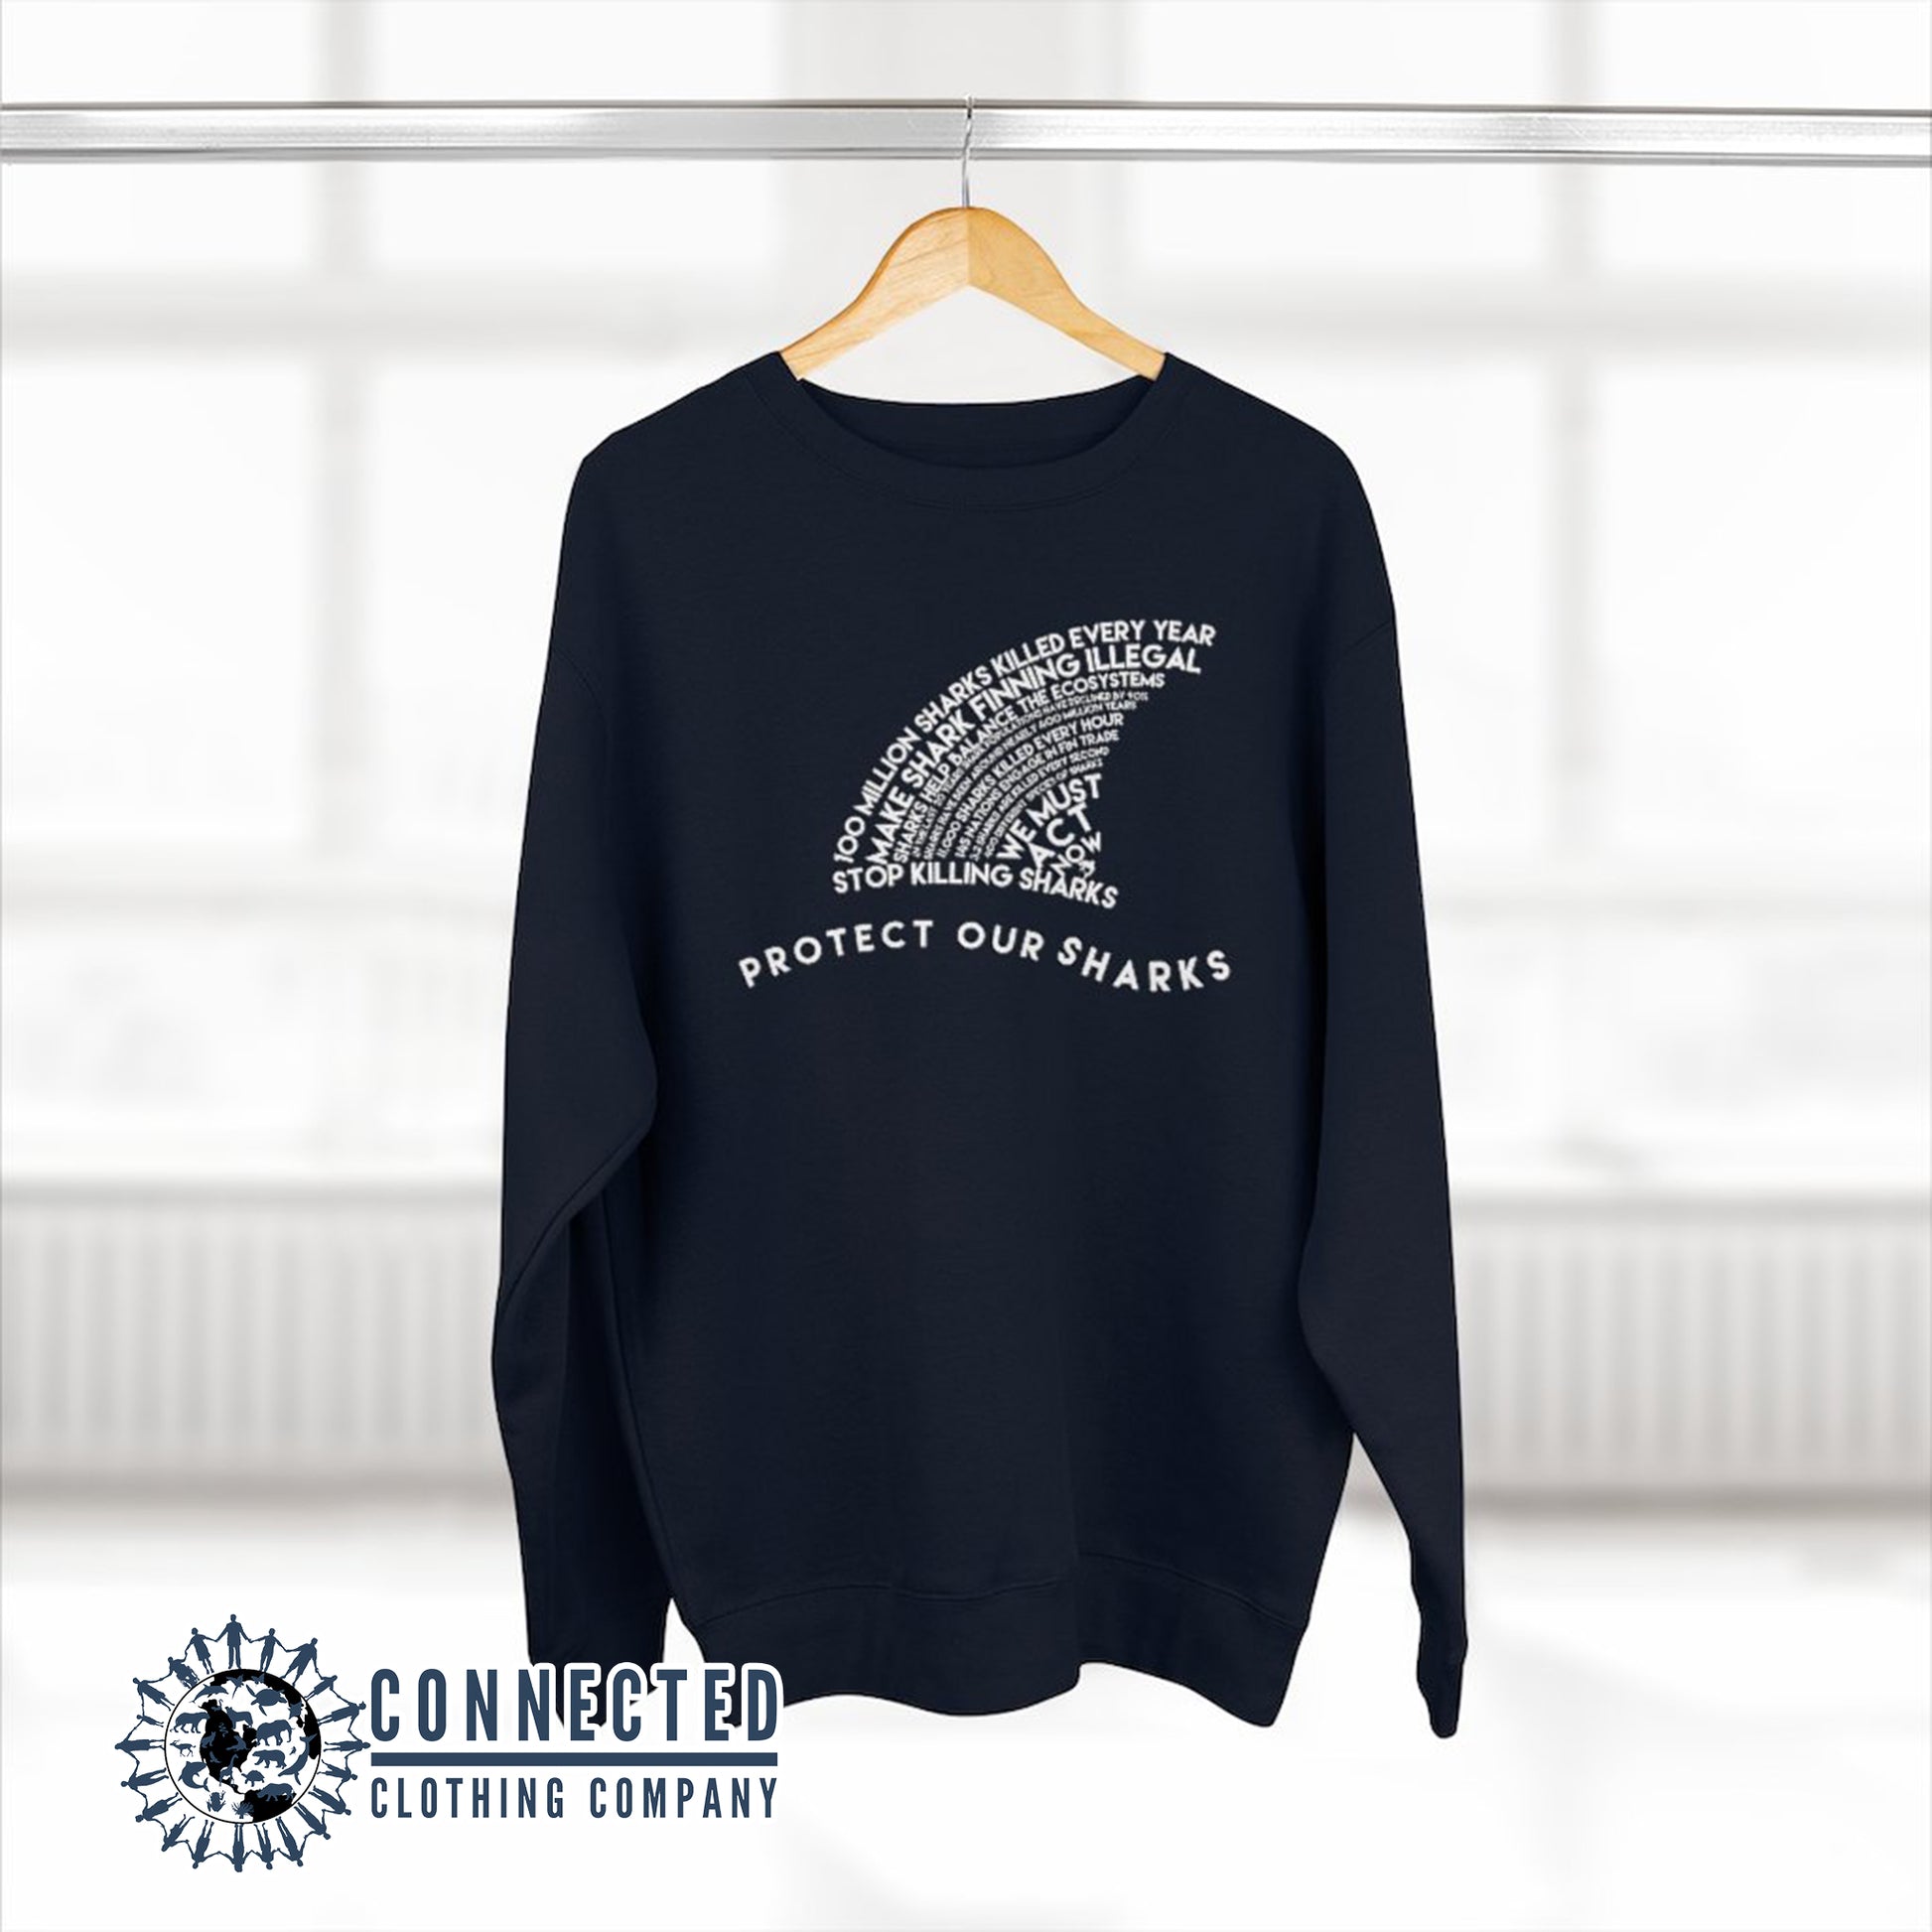 Navy Blue Protect Our Sharks Unisex Crewneck Sweatshirt - Connected Clothing Company - Ethically and Sustainably Made - 10% of profits donated to shark conservation and ocean conservation